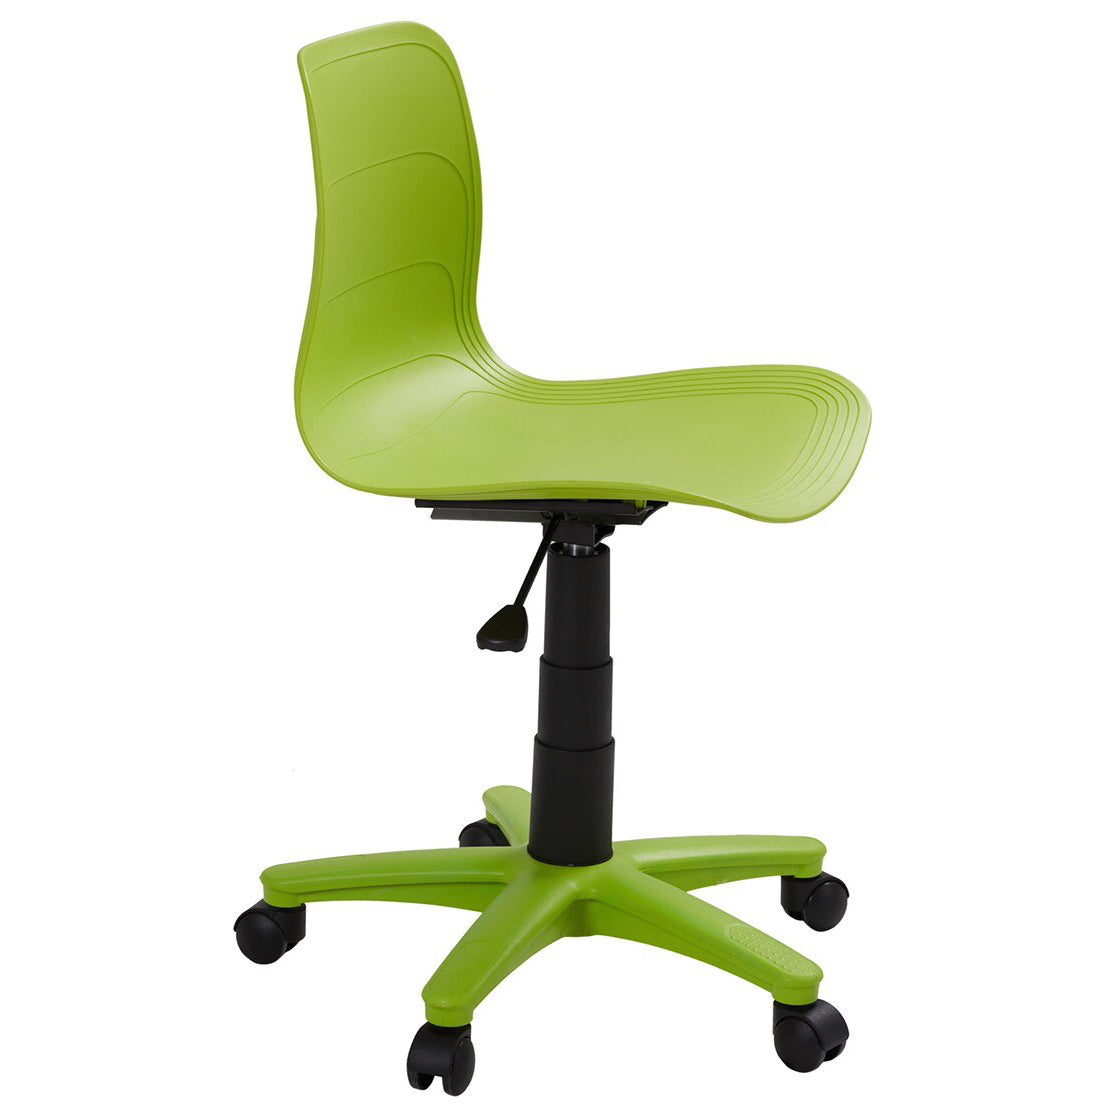 Plastic Swivel Chair Your Ultimate Outdoor Seating Solution (Vibrant Green) HIFUWA-X1